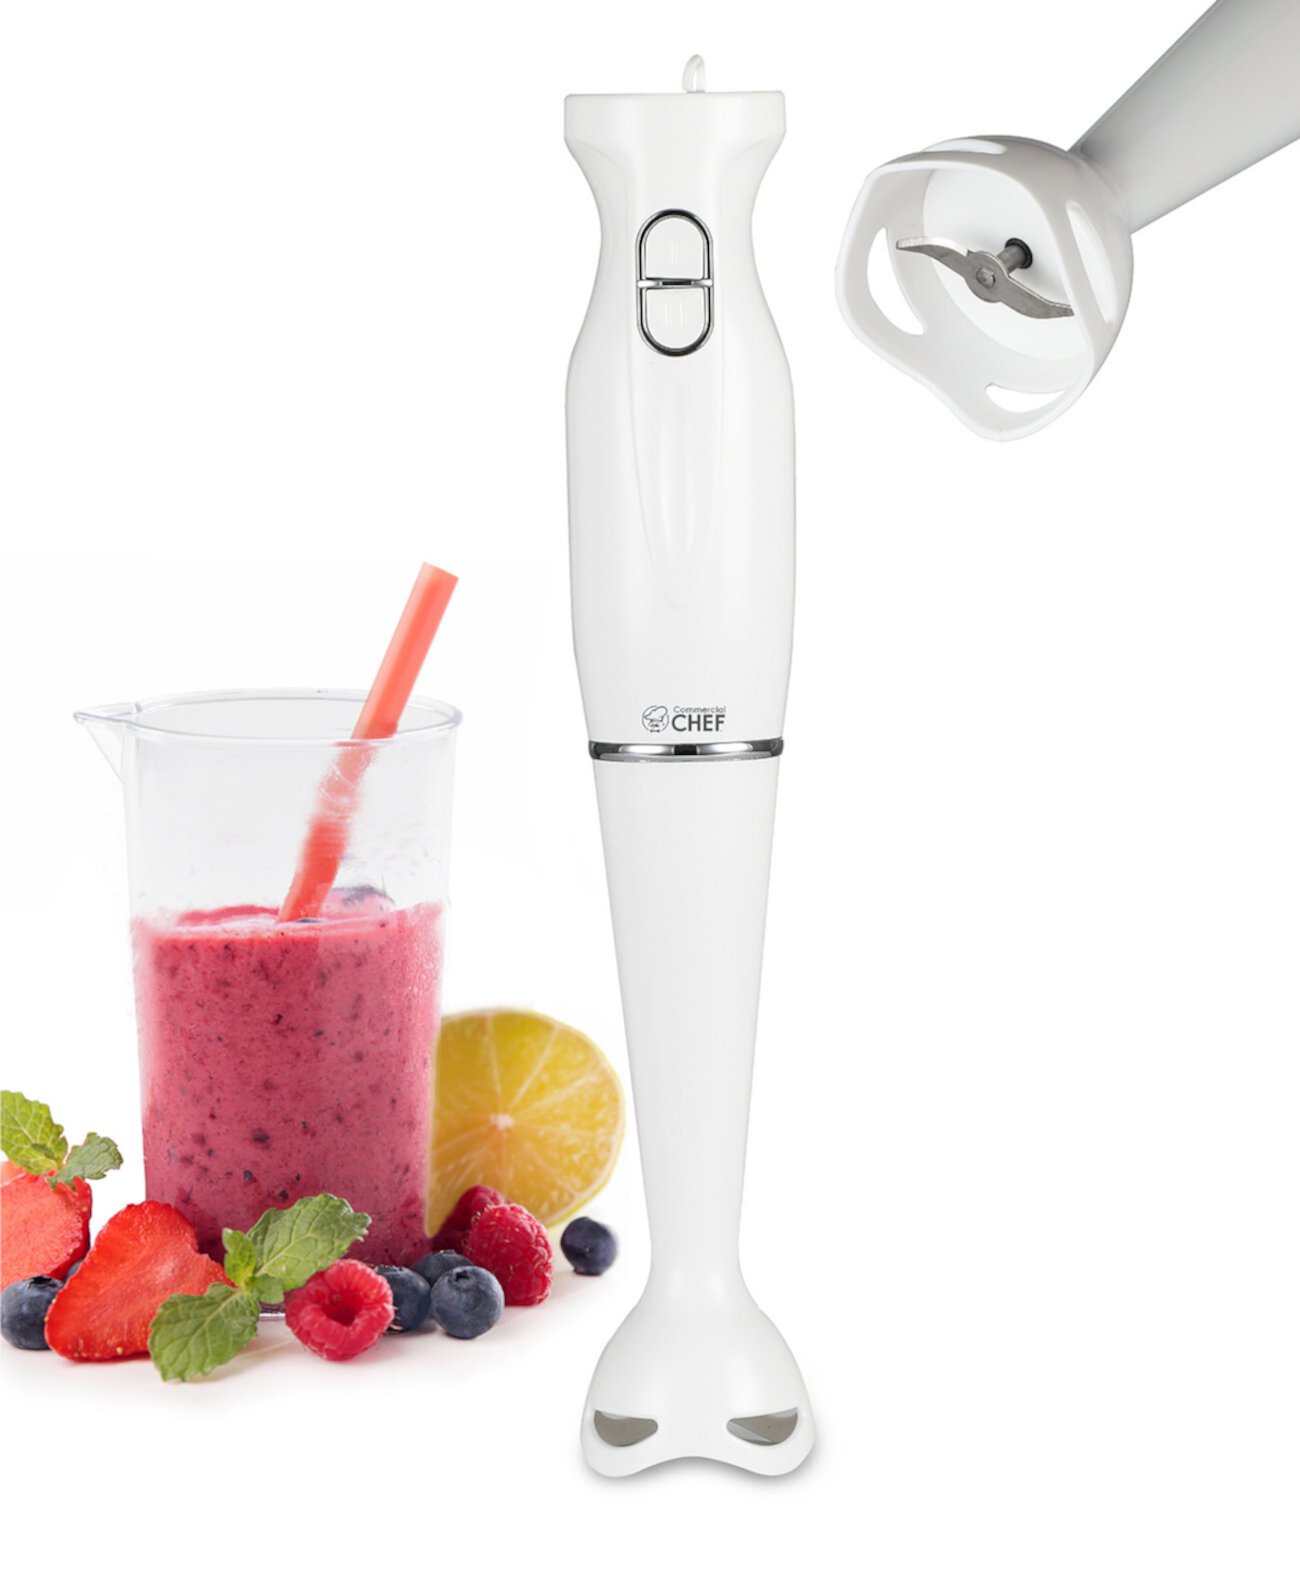 Immersion Blender, Hand Blender with Stainless Steel Blades, Immersion Blender with Quiet Motor, Electric Mini Blender for Delicious Food Commerical Chef